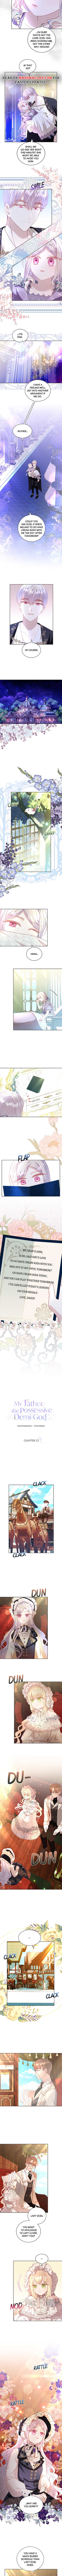 My Father, The Possessive Demi-God - Page 2